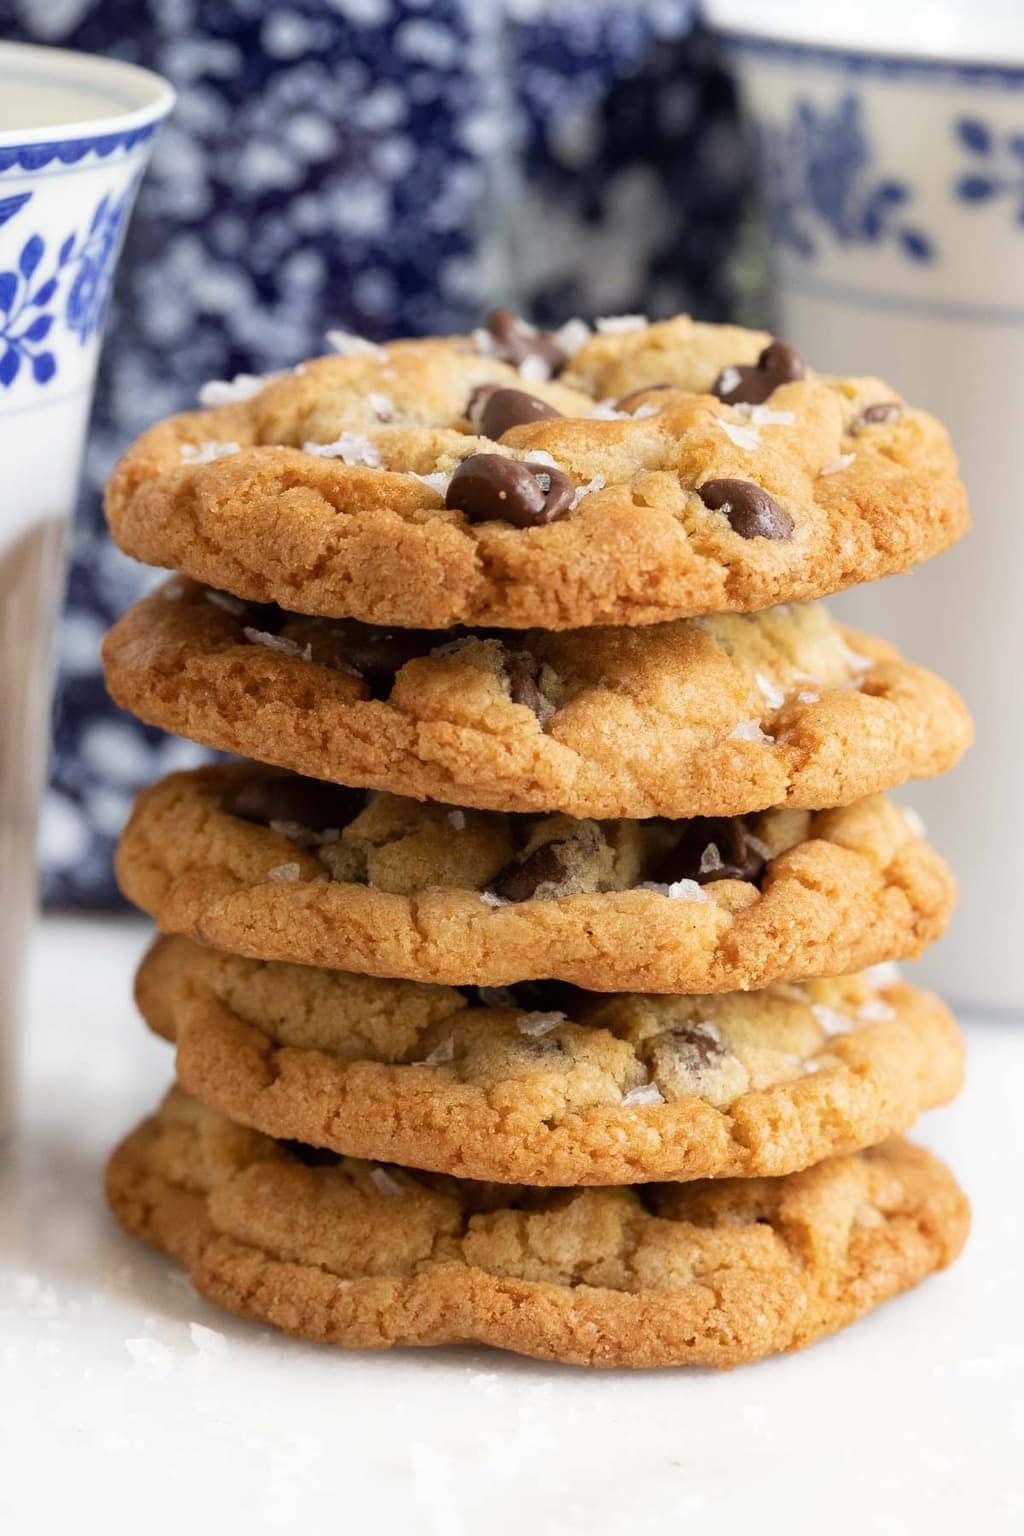 Vertical closeup photo of a stack of The BEST Chocolate Chip Cookies with a cookie jar and milk glasses in the background.